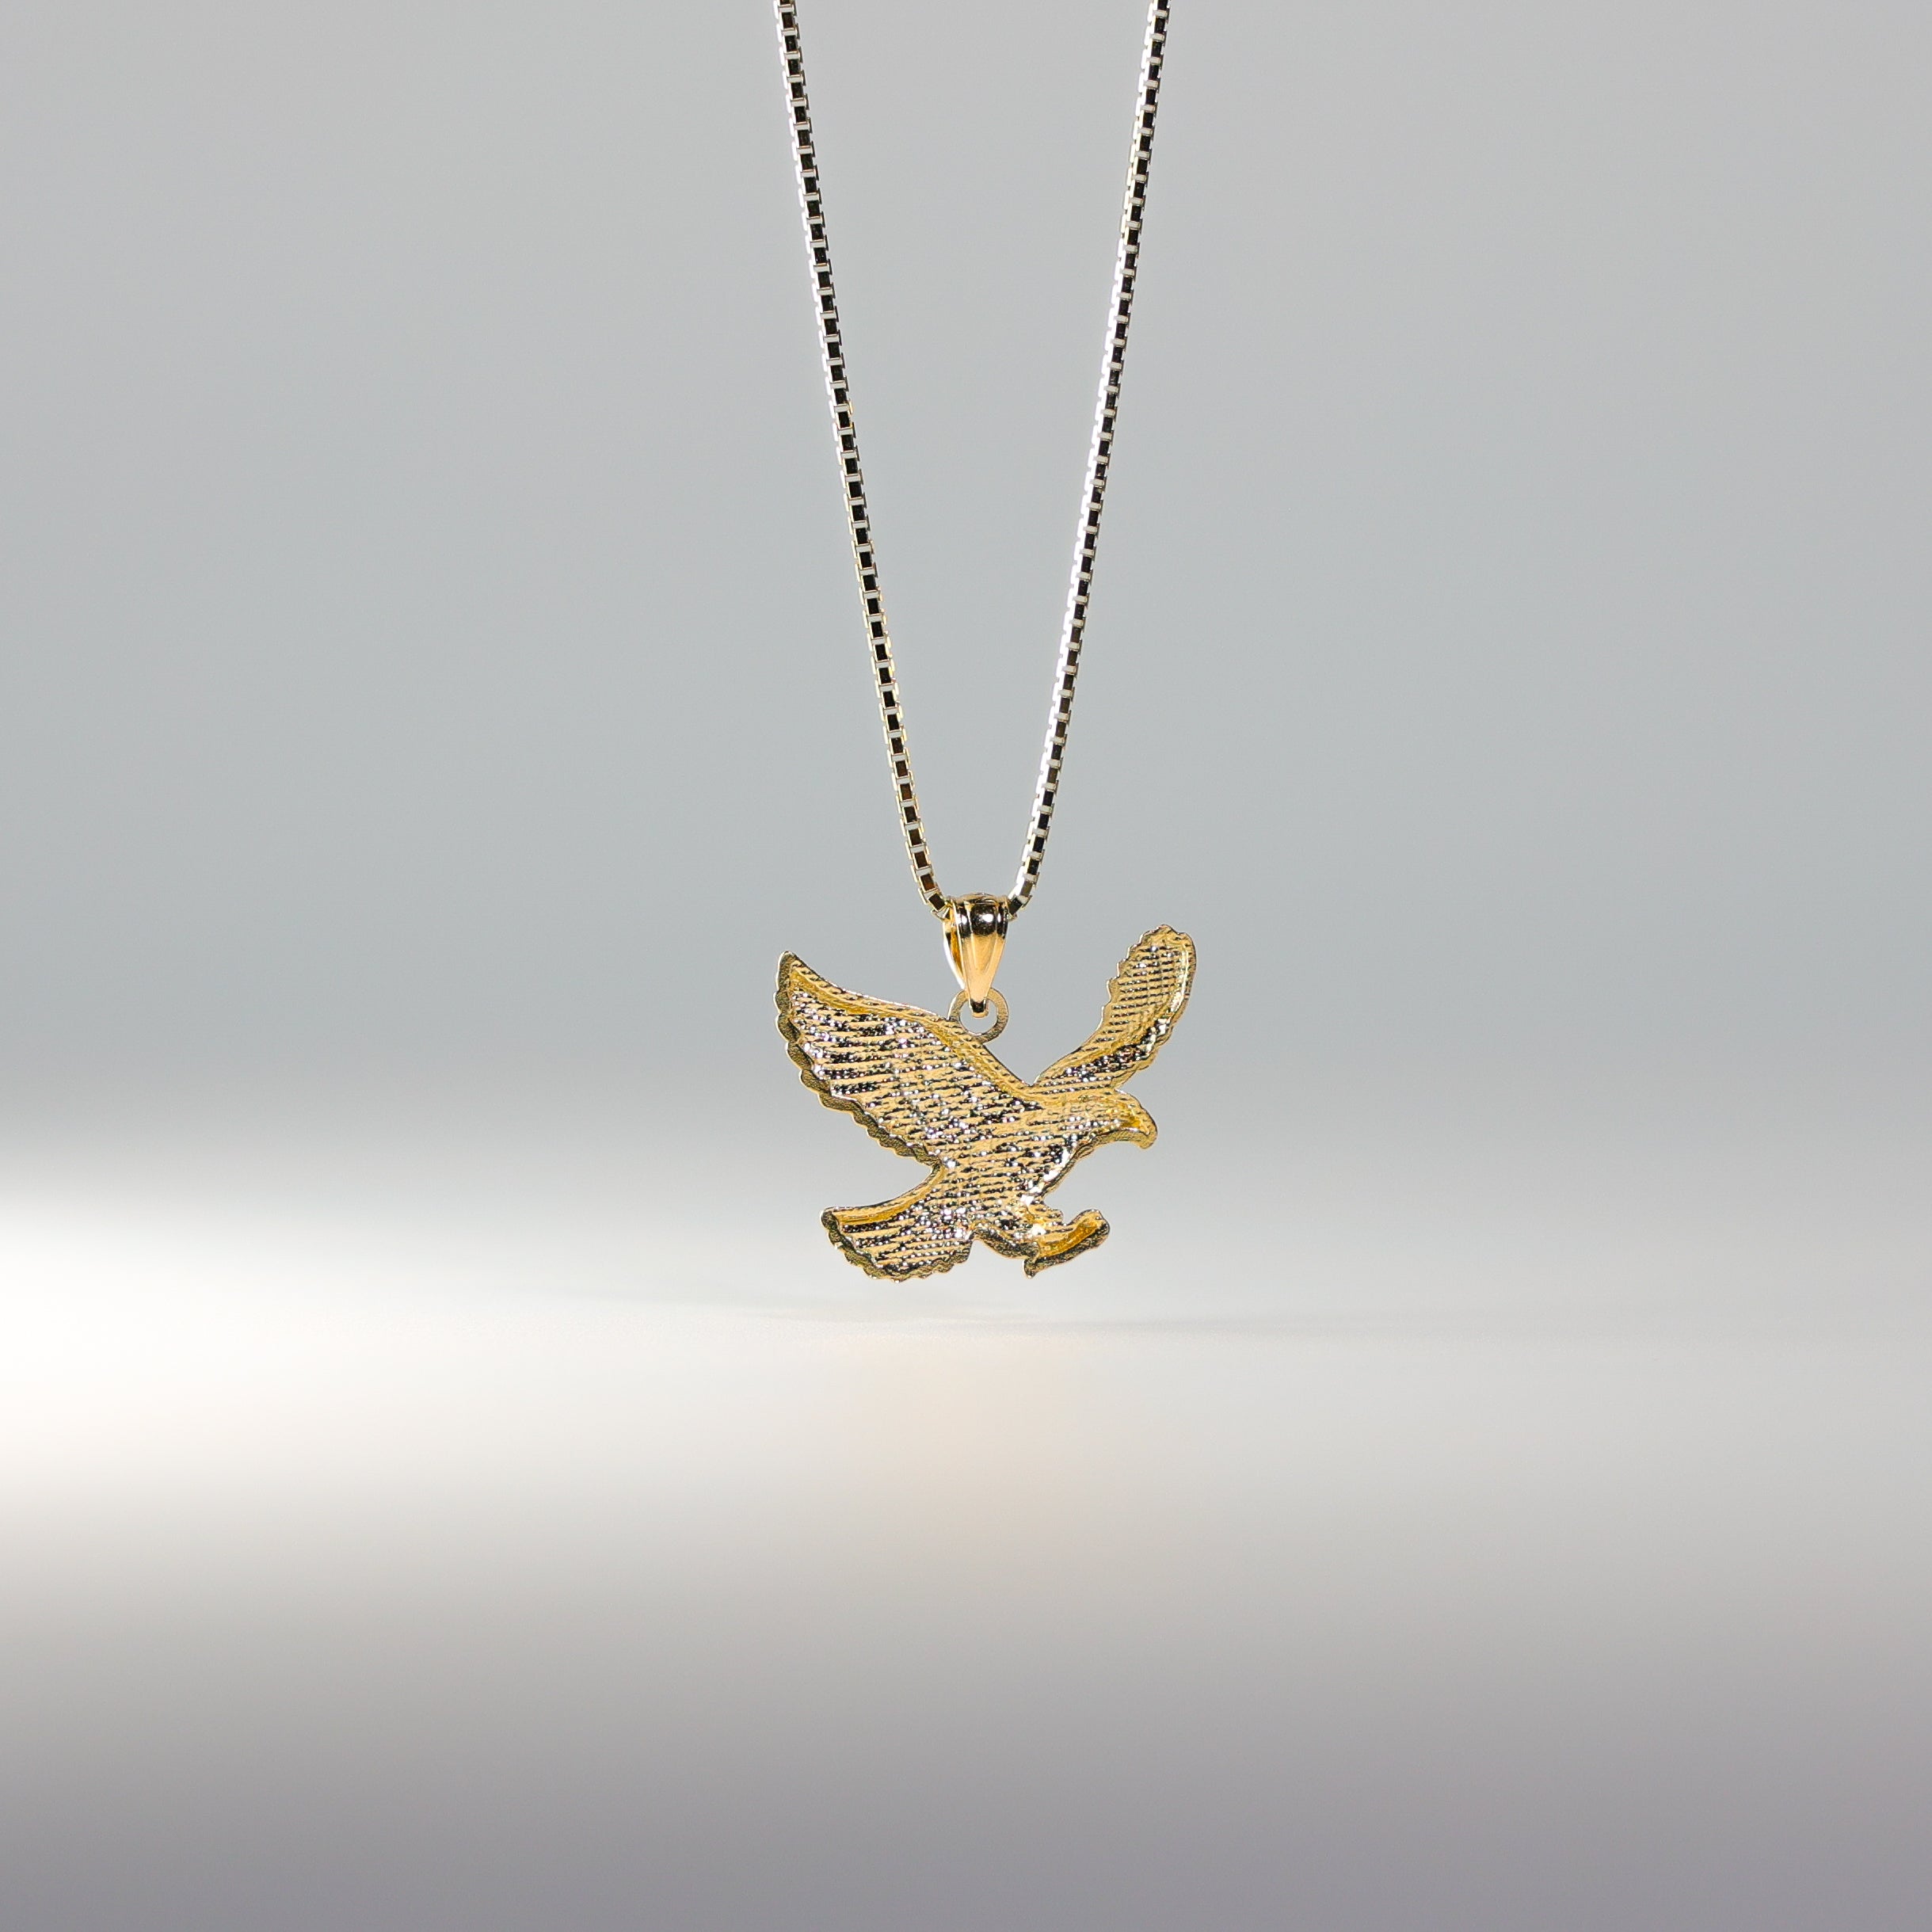 Gold Flying Eagle Pendant Model-1596 - Charlie & Co. Jewelry